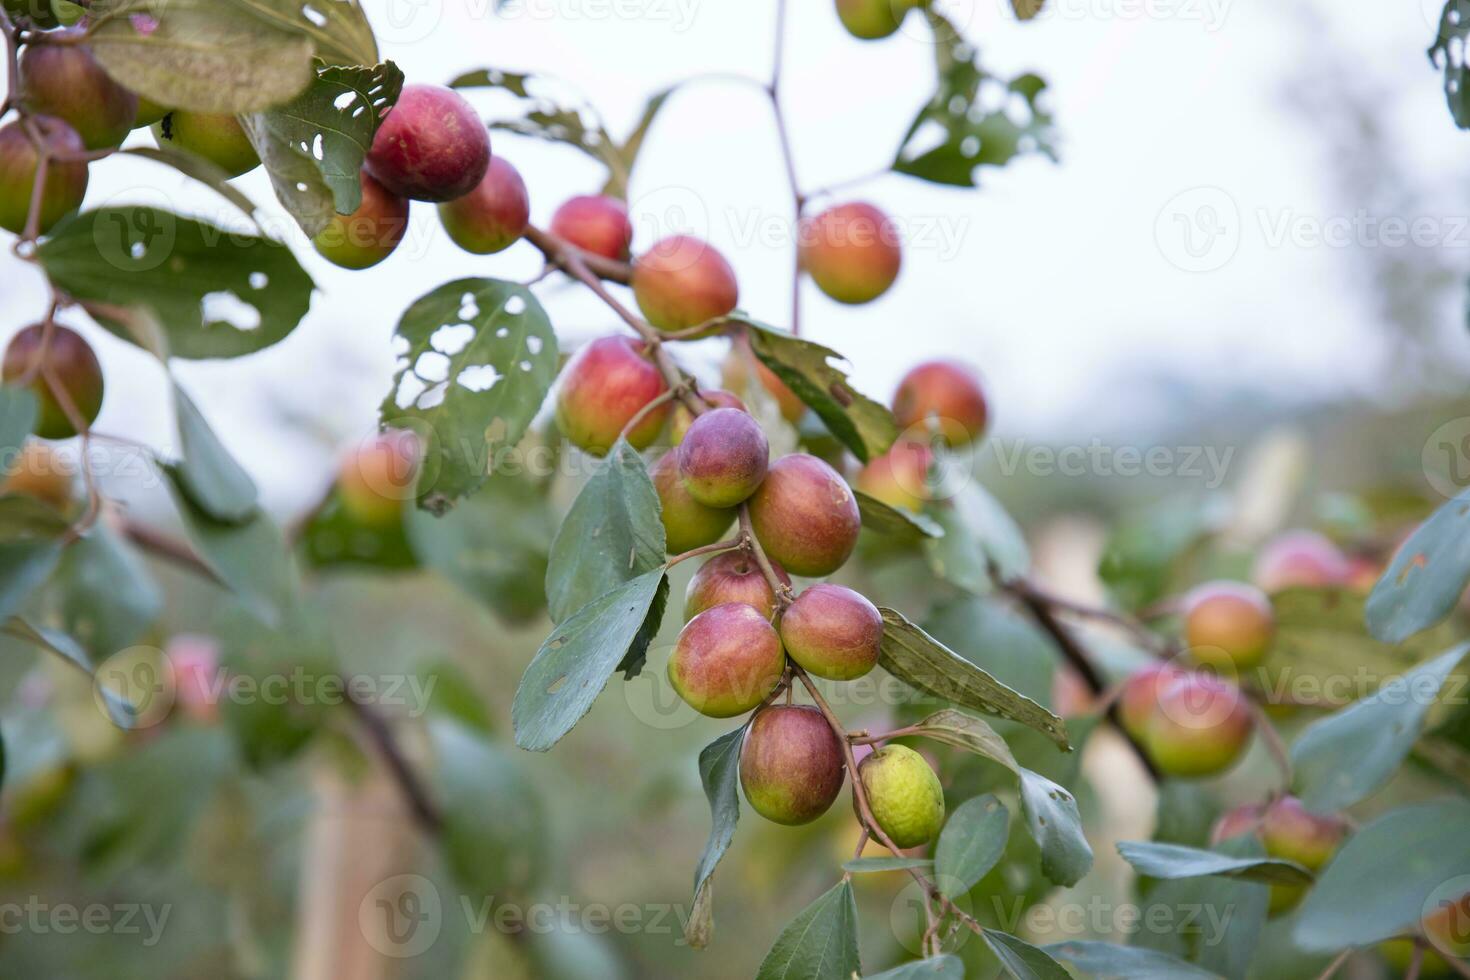 Red jujube fruits or apple kul boroi on a branch in the garden. Shallow depth of field photo